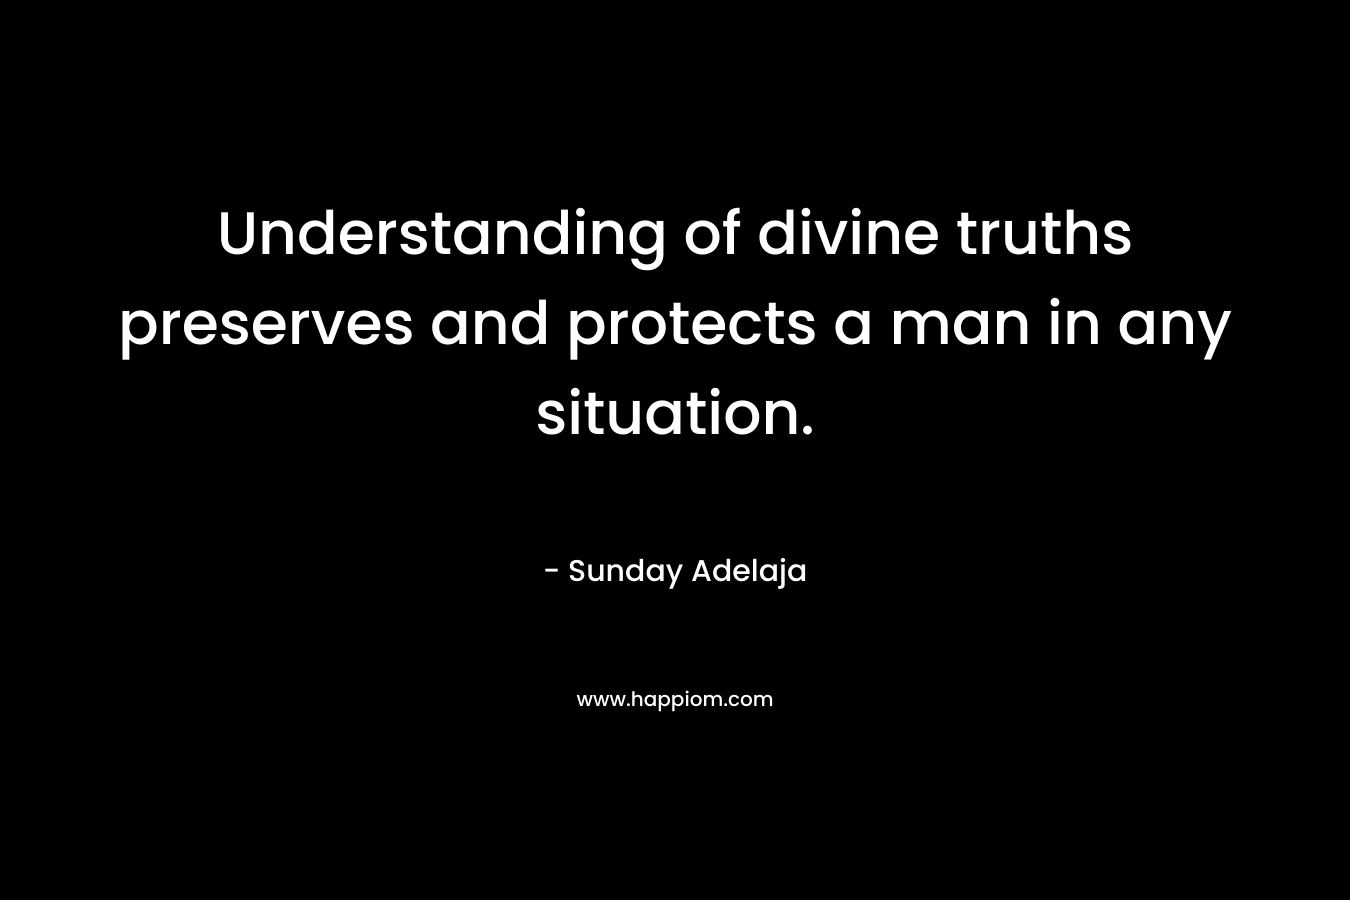 Understanding of divine truths preserves and protects a man in any situation. – Sunday Adelaja